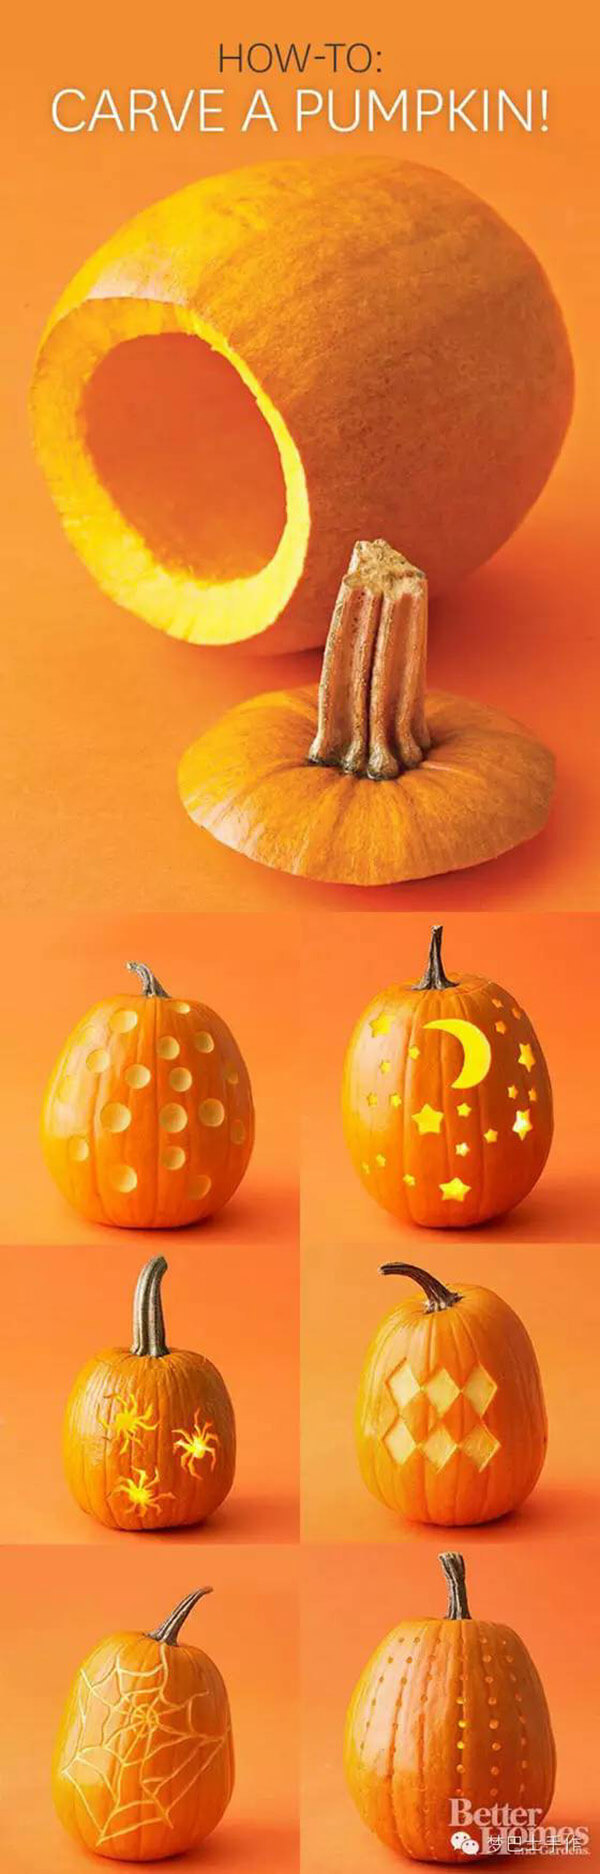 Get the scoop on how to carve the perfect pumpkin this Halloween.